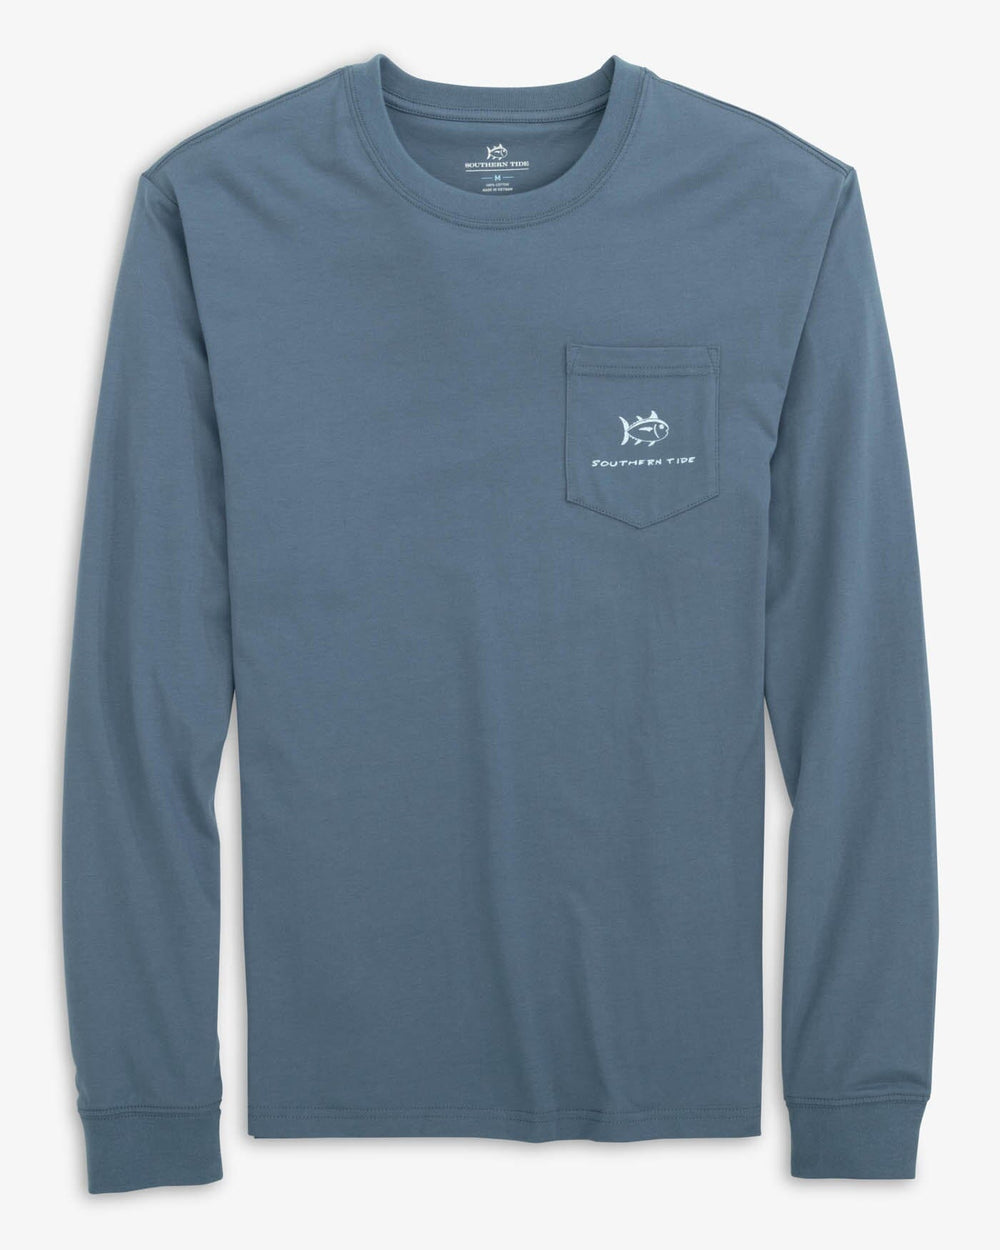 The front view of the Southern Tide Jon Boat Fishing Long Sleeve T-Shirt by Southern Tide - Blue Haze